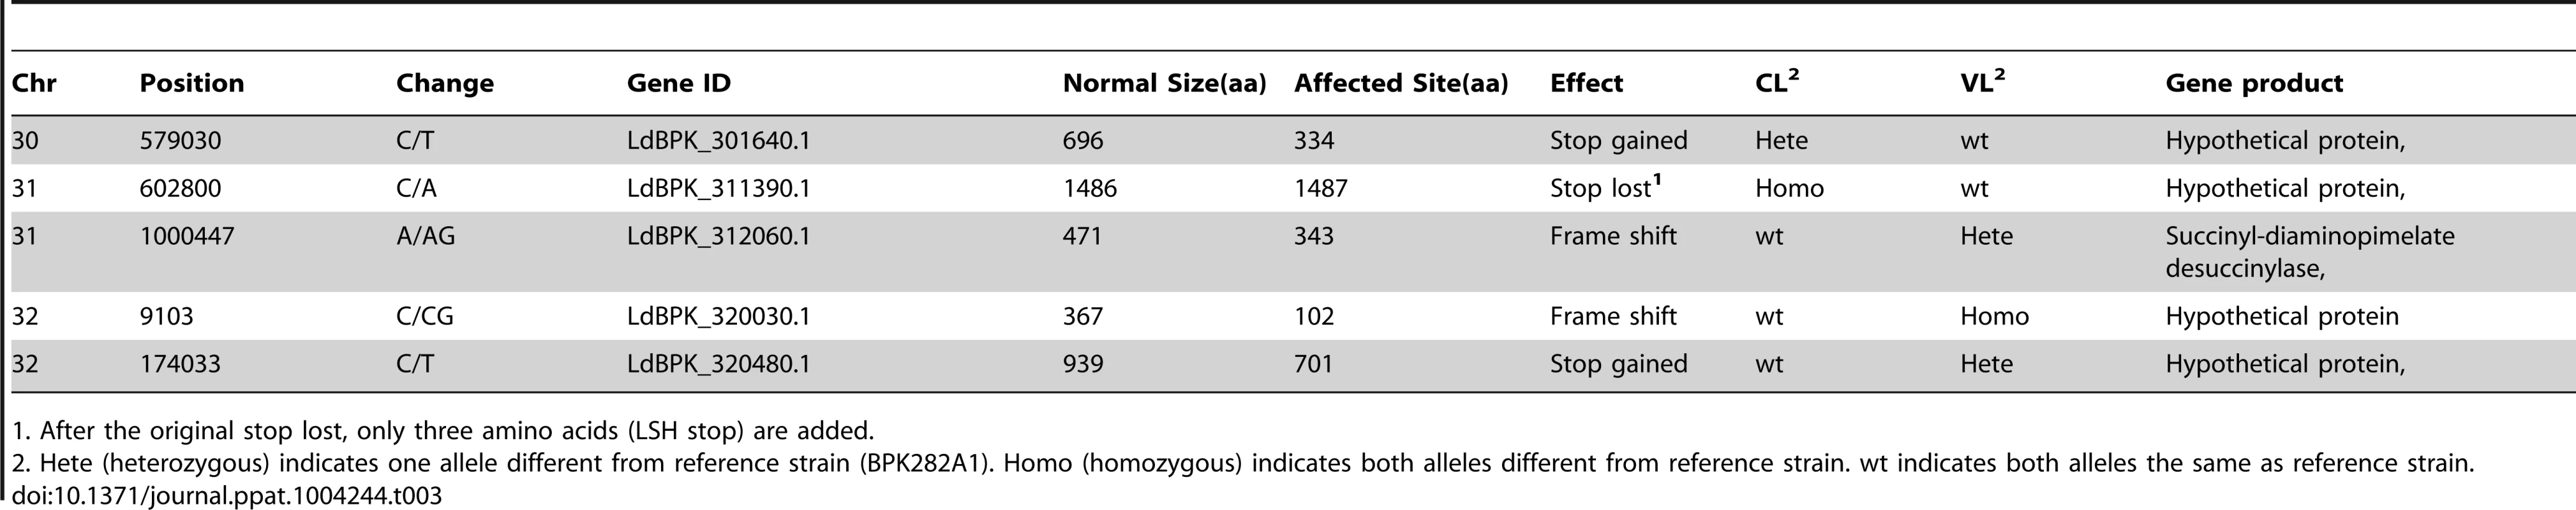 Genes unequally affected in the CL and VL isolates by frame shift or stop site change.